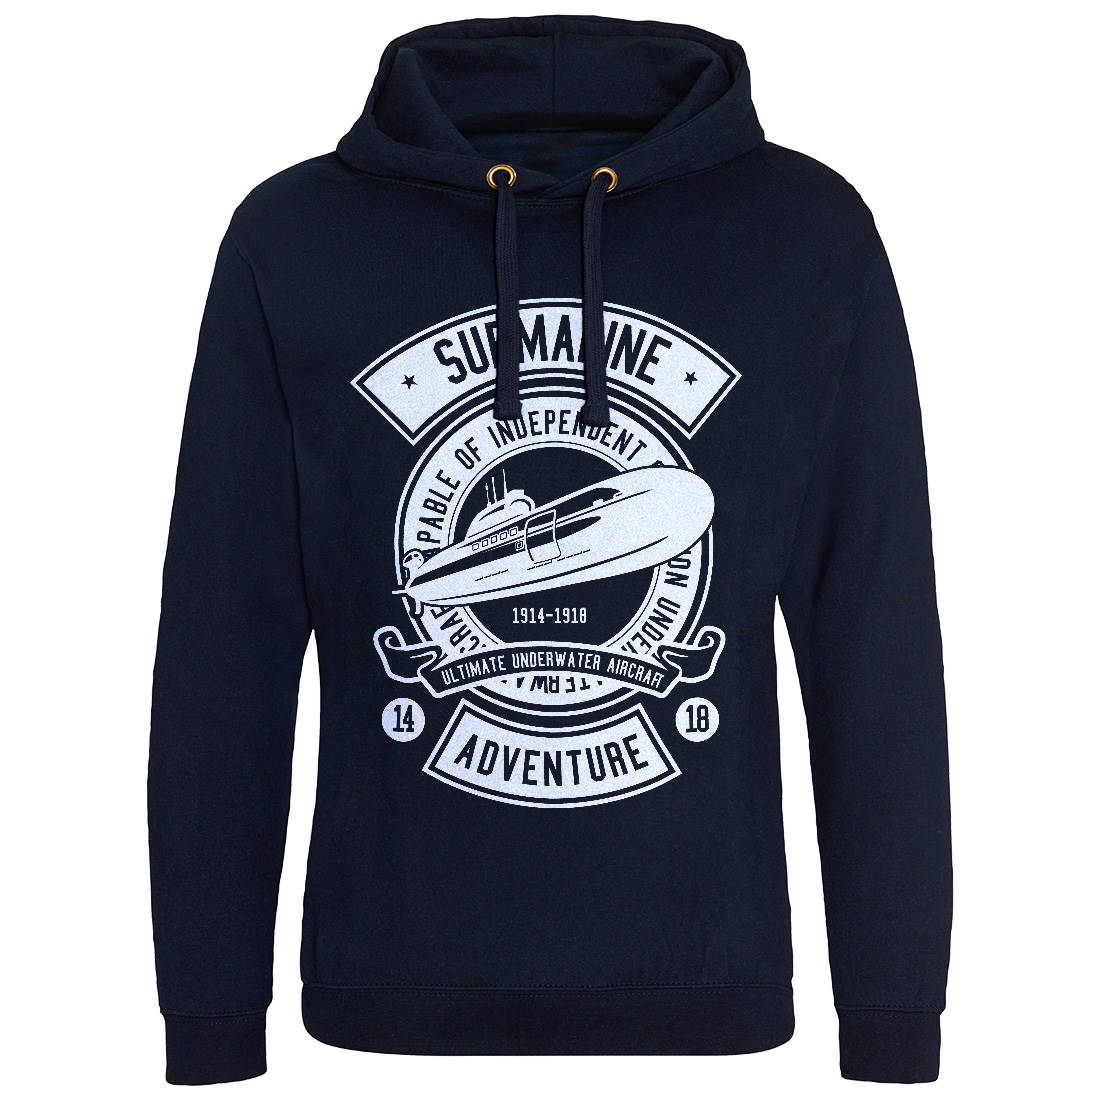 Submarine Mens Hoodie Without Pocket Navy B645